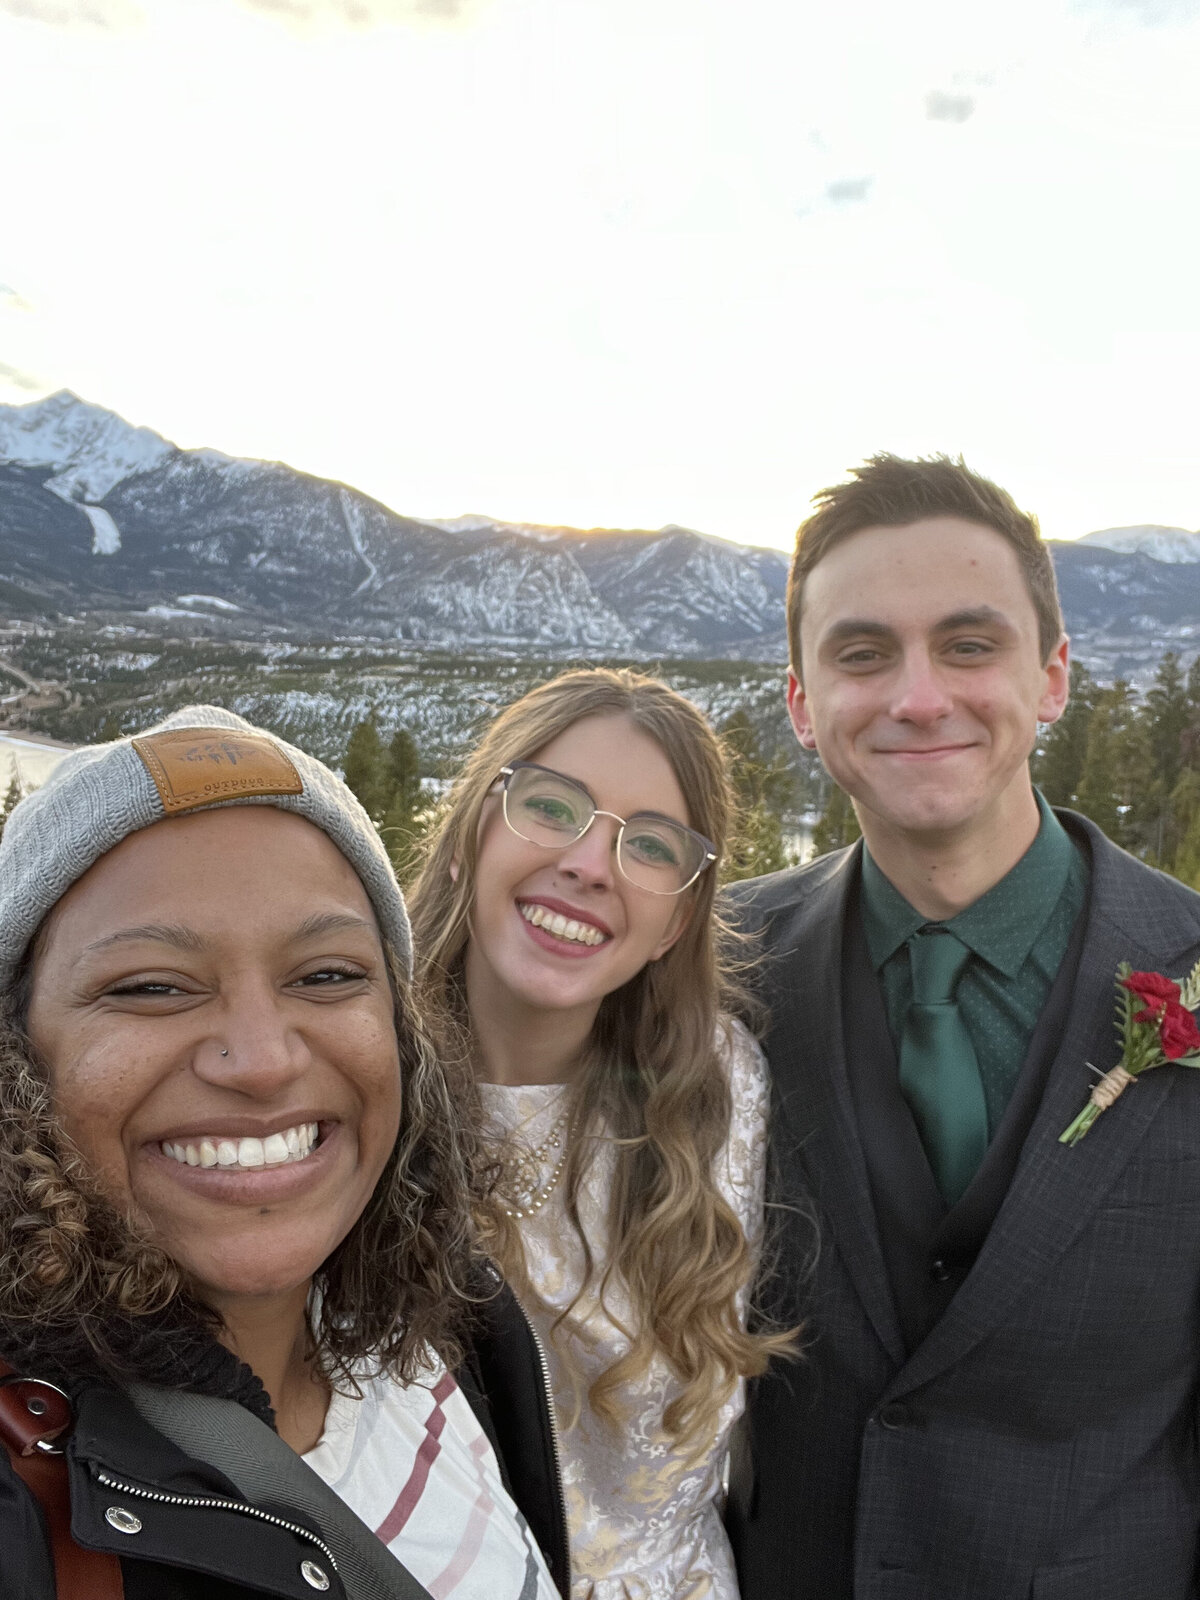 Capturing Love in the Rockies: Jessica Margaret Photography's Unique Take on Colorado Elopements